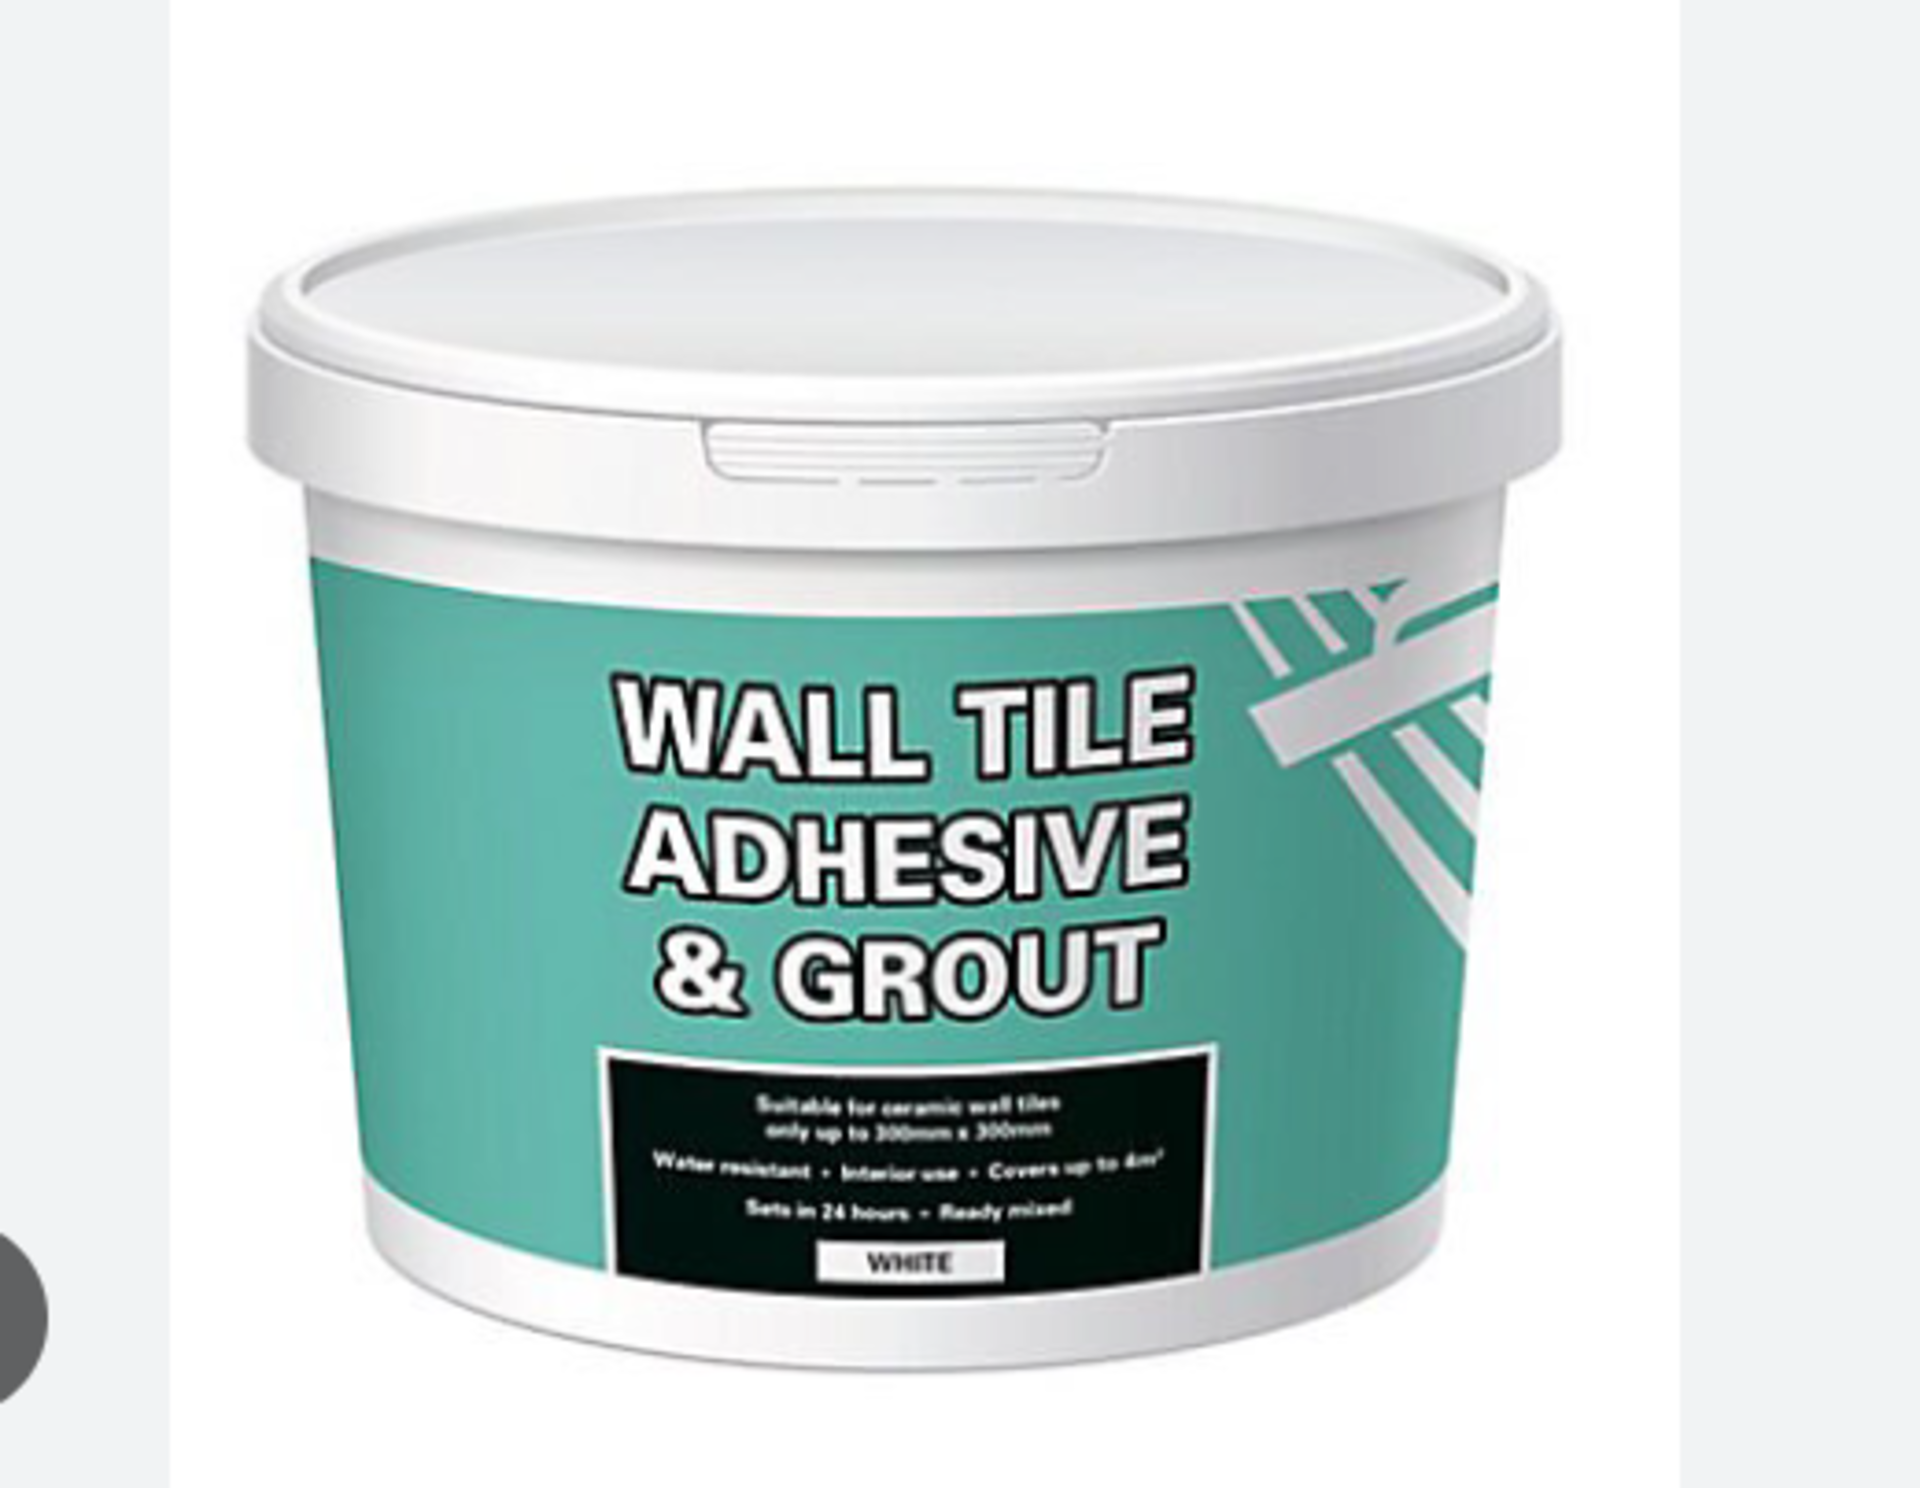 15 X 6.6KG TUBS OF WALL AND TILE ADHESIVE & GROUT. WATER RESISANT, INTERIOR USE, EACH TUB COVERS